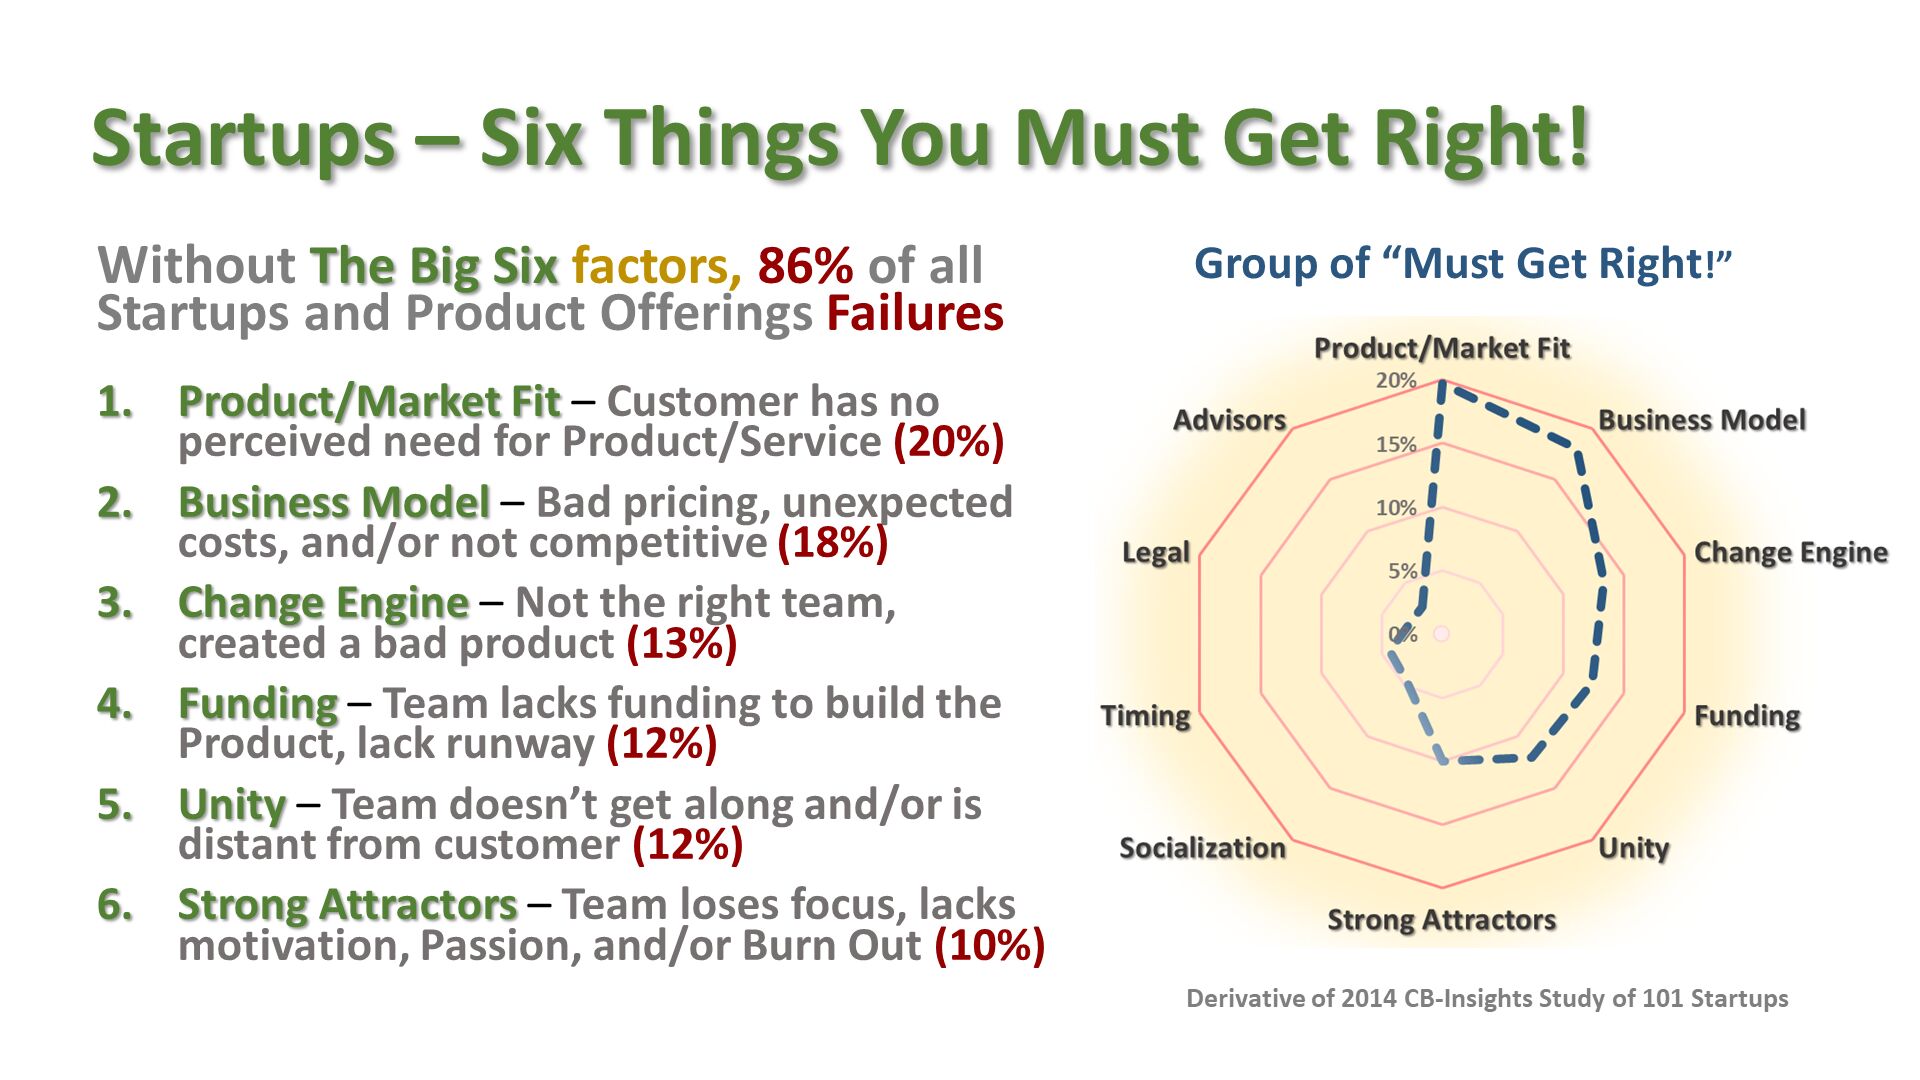 Startups – Six Things You Must Get Right! . Without The Big Six factors, 86% of all Startups and Product Offerings Failures
Product/Market Fit – Customer has no perceived need for Product/Service (20%)
Business Model – Bad pricing, unexpected costs, and/or not competitive (18%)
Change Engine – Not the right team, created a bad product (13%)
Funding – Team lacks funding to build the Product, lack runway (12%)
Unity – Team doesn’t get along and/or is distant from customer (12%)
Strong Attractors – Team loses focus, lacks motivation, Passion, and/or Burn Out (10%)
. Group of “Must Get Right!”. Derivative of 2014 CB-Insights Study of 101 Startups . 